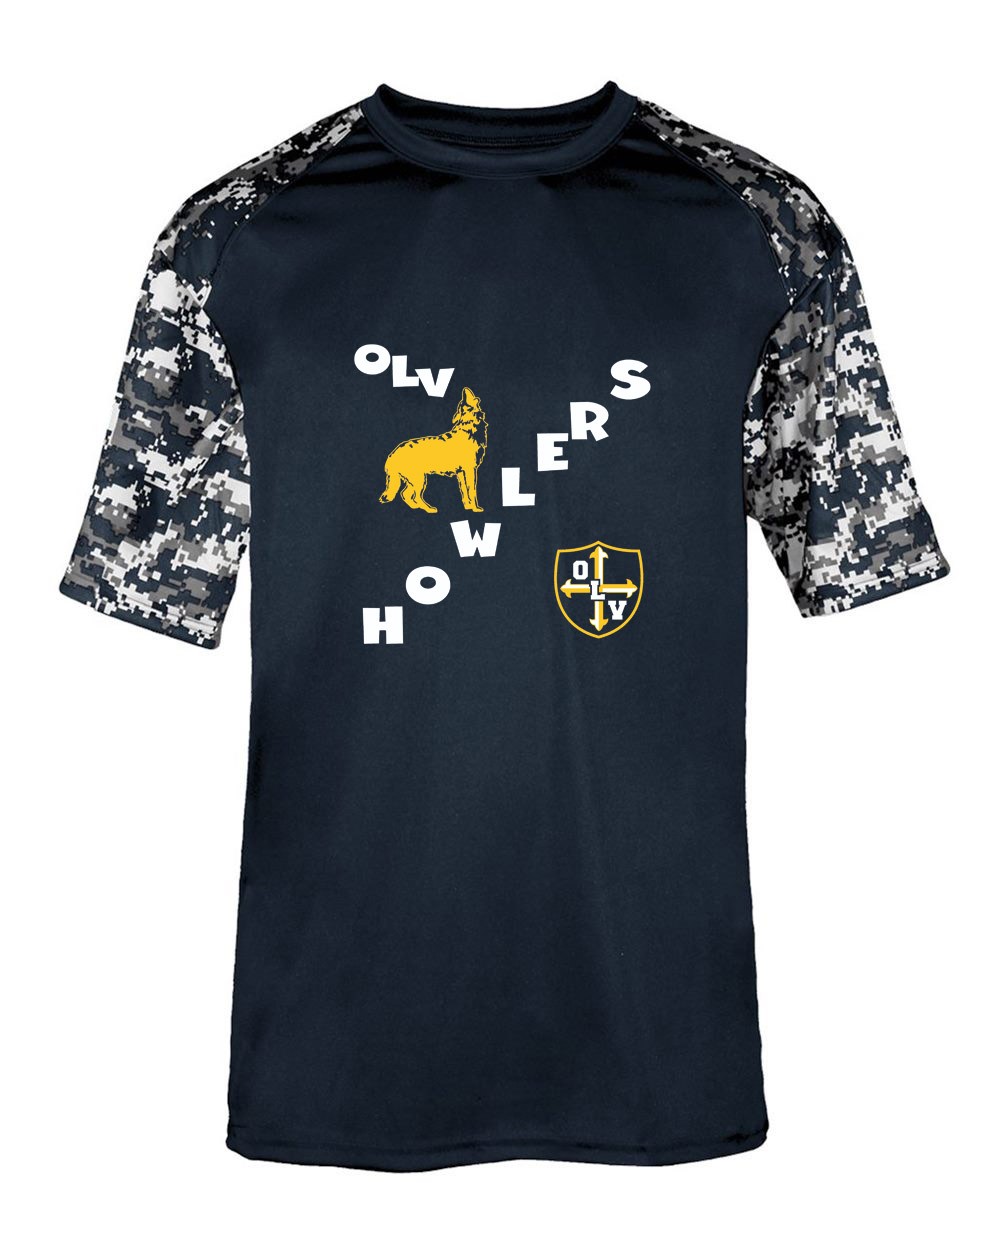 OLV S/S Spirit Digital Camo T-Shirt w/ Howler Logo - Please Allow 2-3 Weeks for Delivery